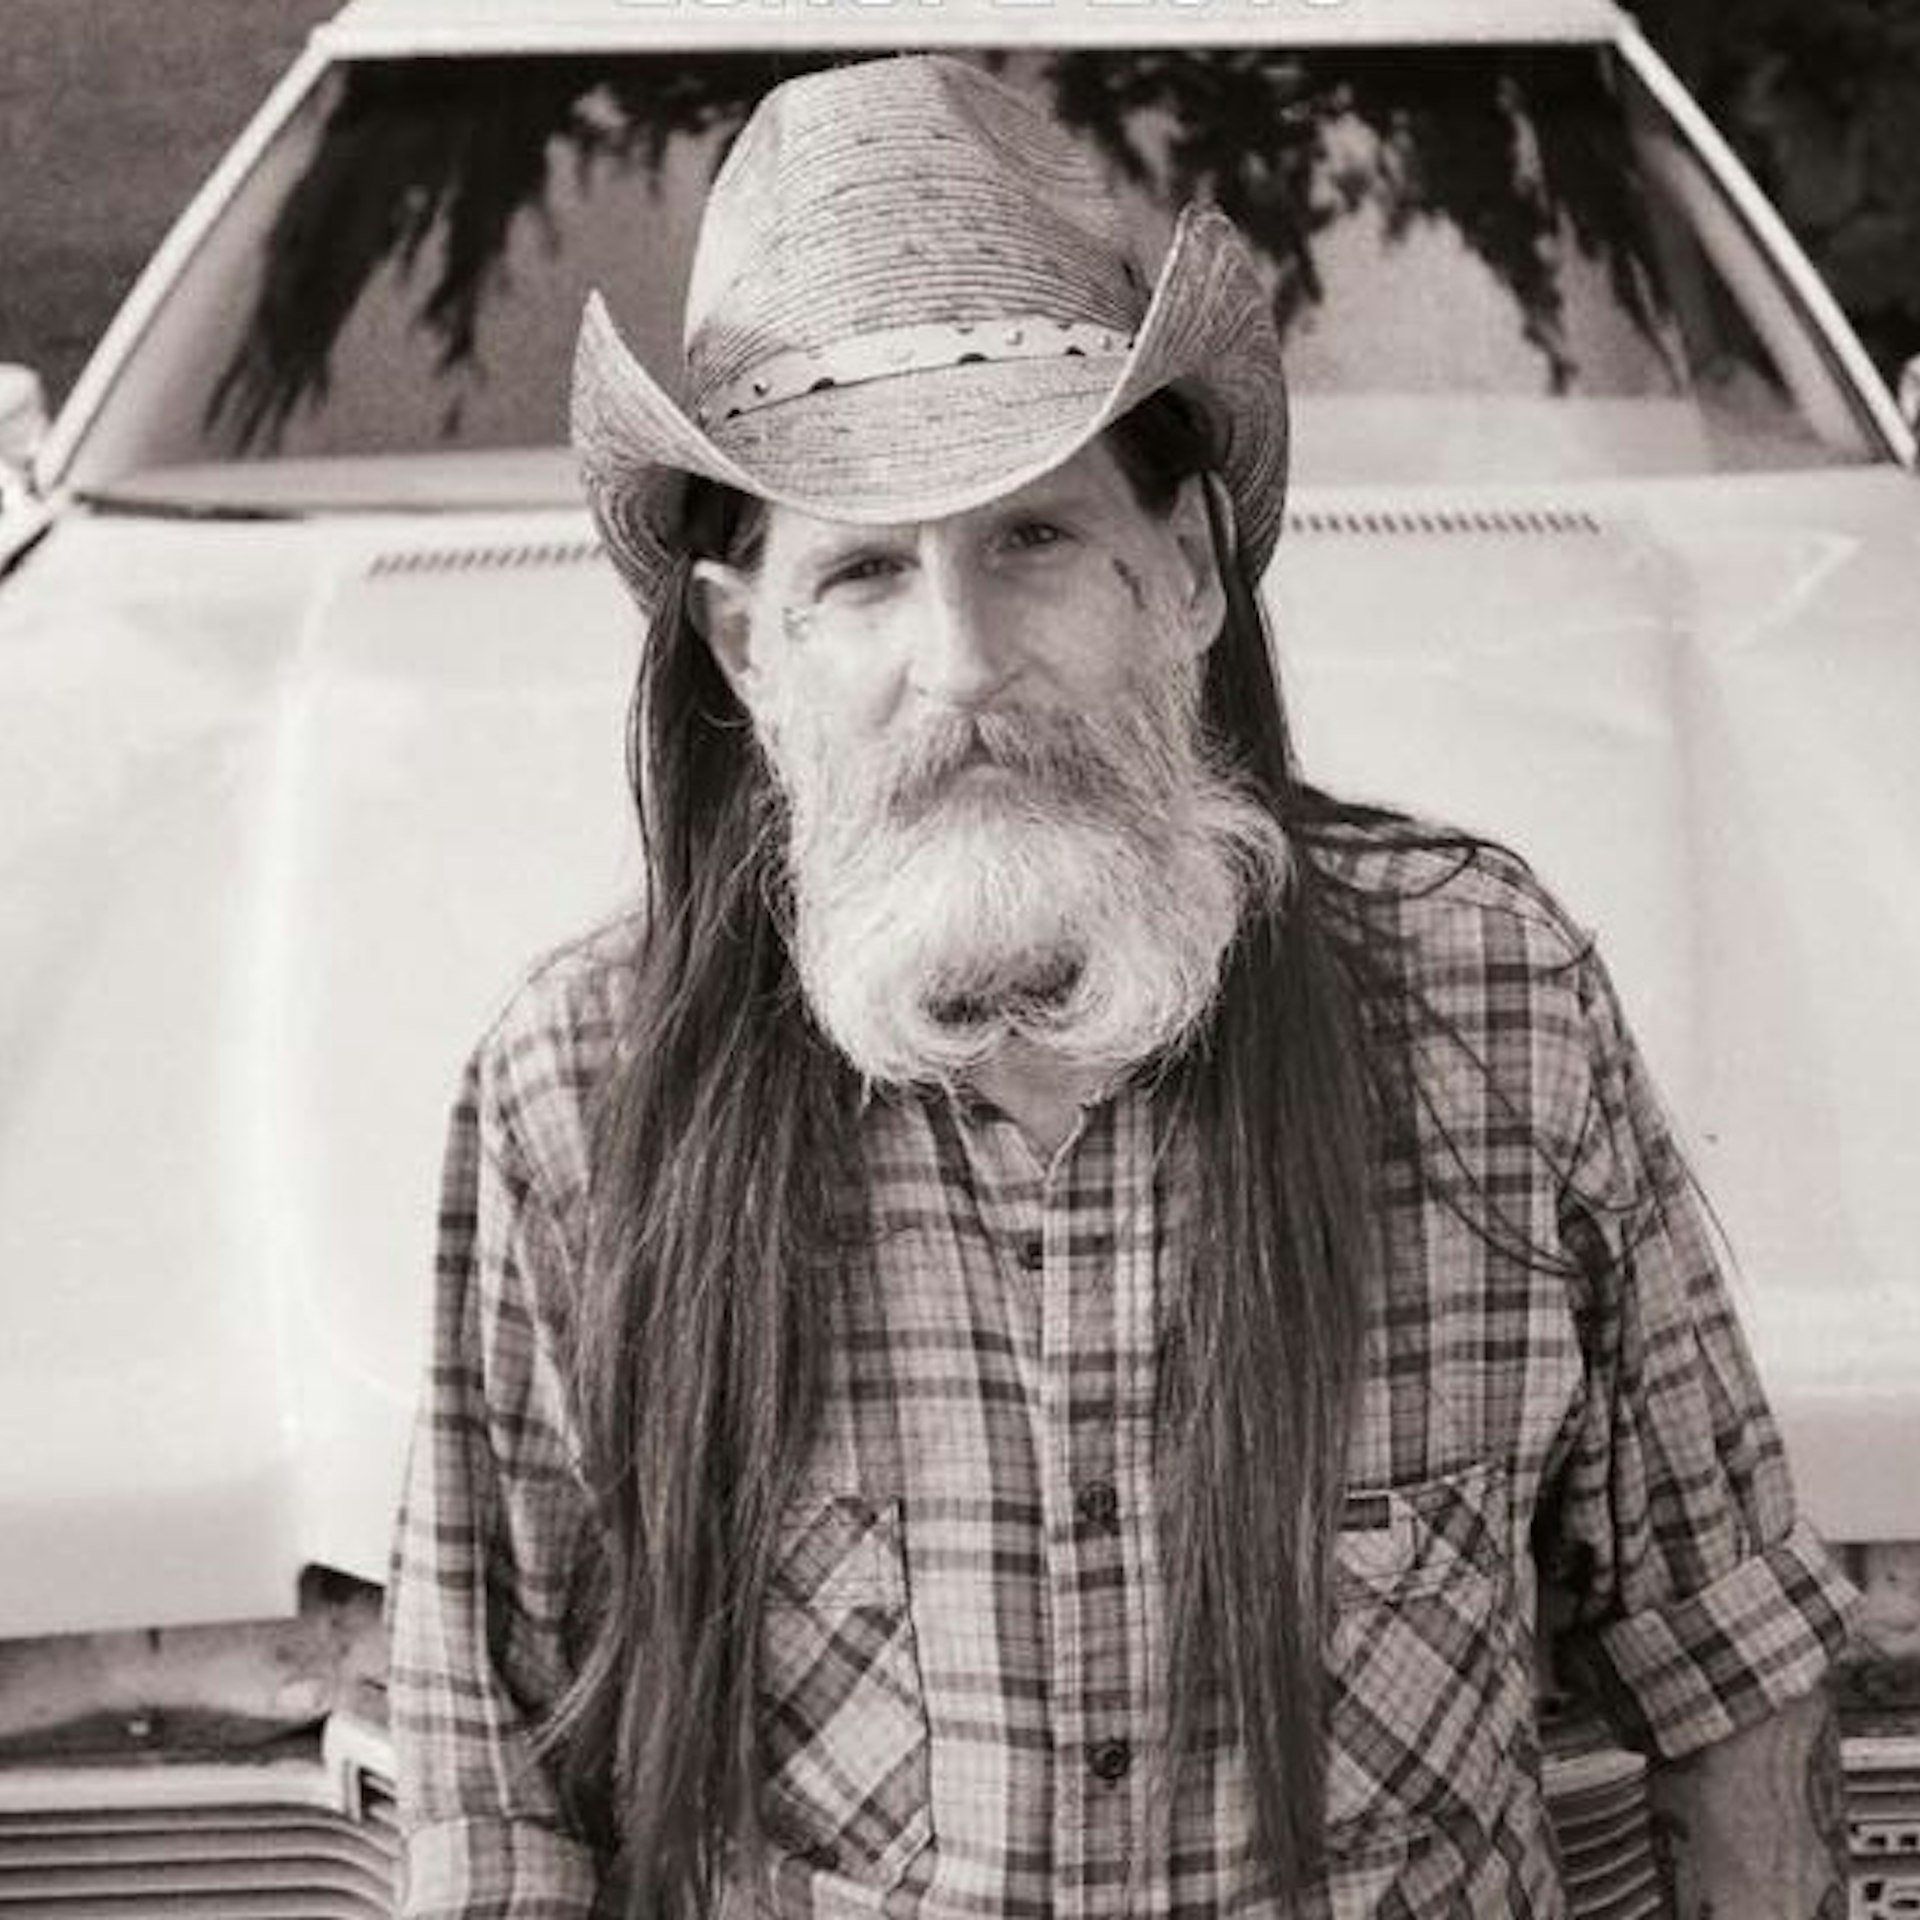 Dylan Carlson (Earth) Tour Dates & Tickets 2023